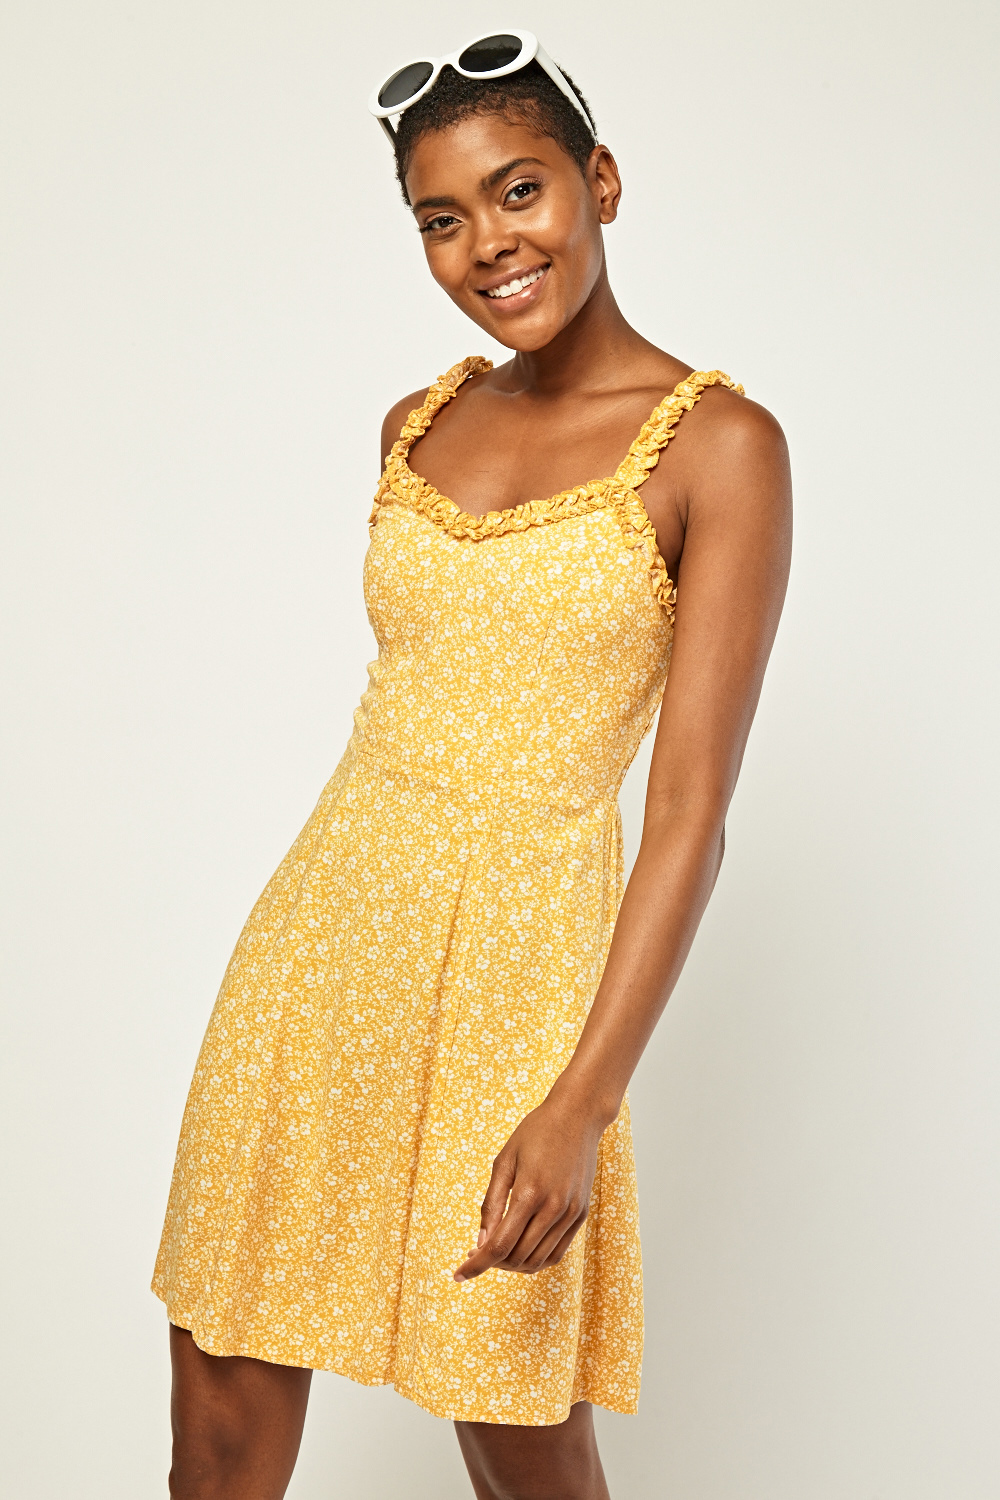 Ruched Strap Sun Dress - Just $7